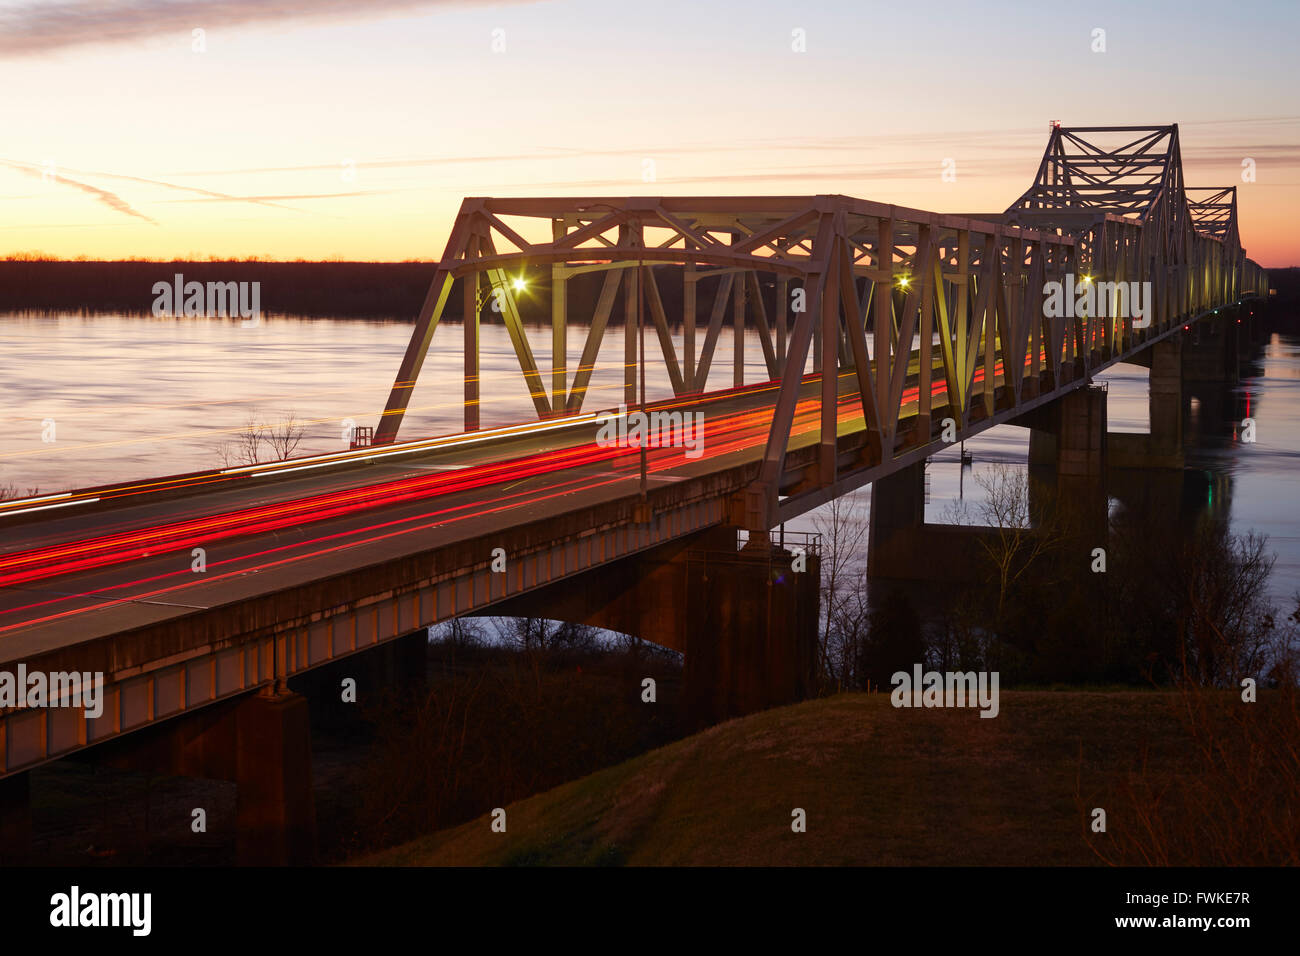 Vicksburg I-20 Bridge over the Mississippi River at twilight. Louisiana is on the other side of the river. Stock Photo